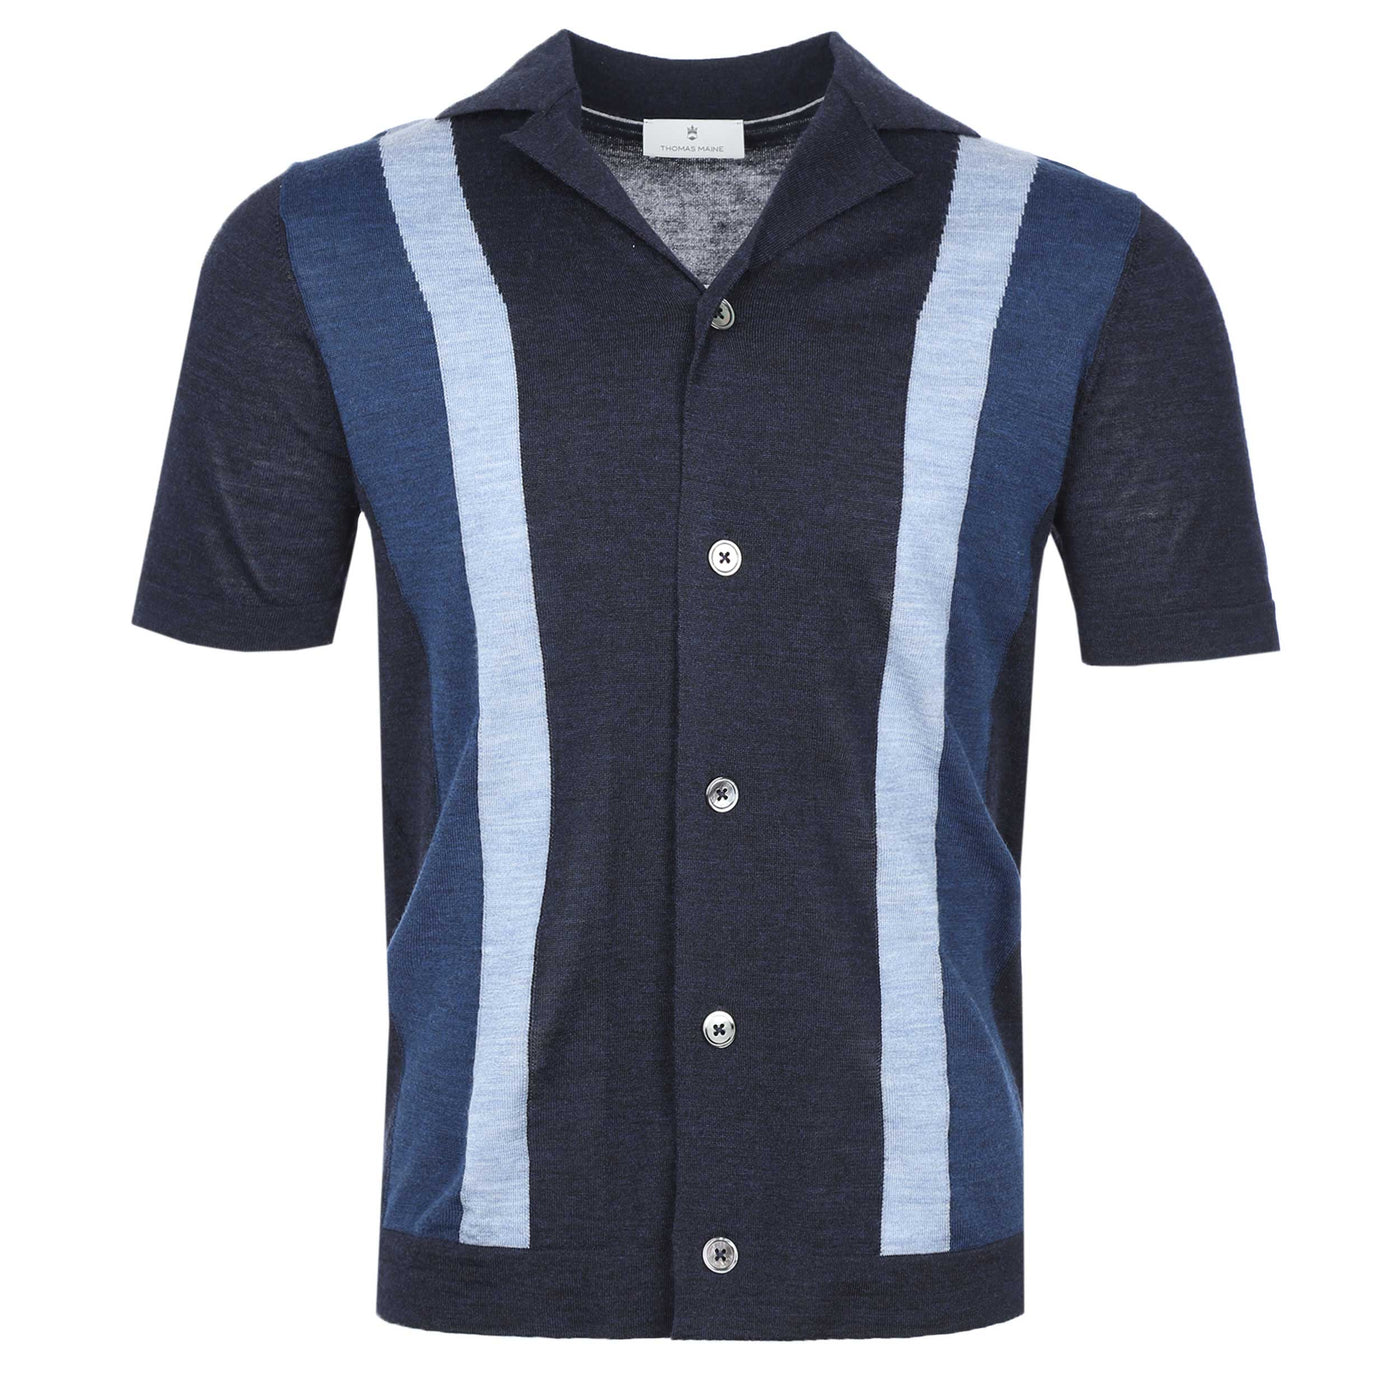 Thomas Maine Knitted Button Shirt in Navy